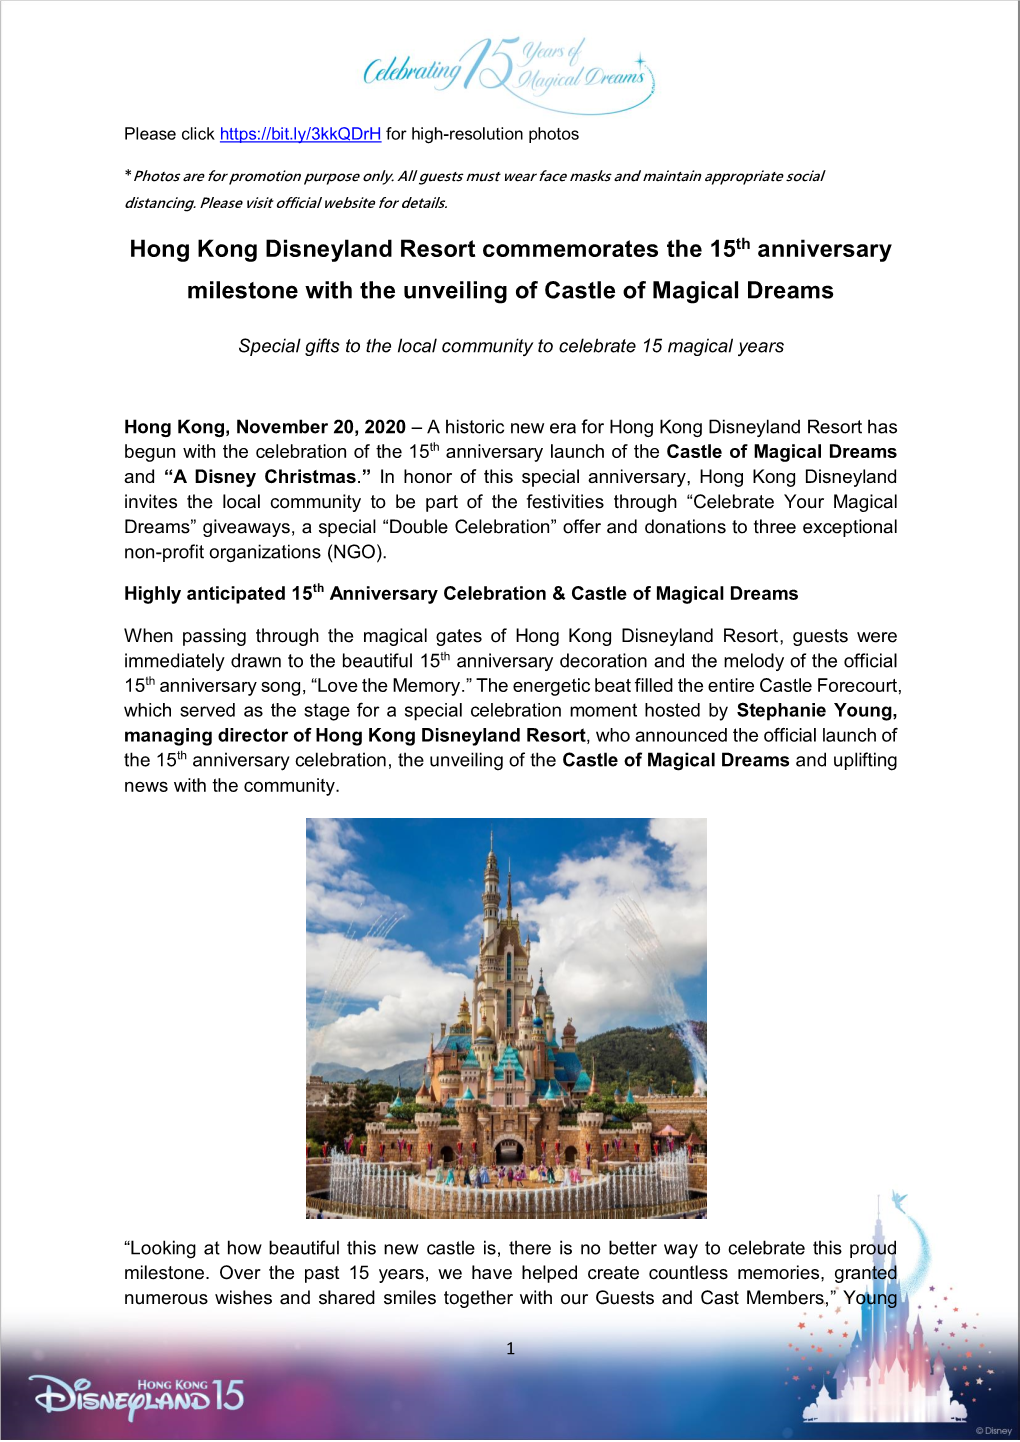 Hong Kong Disneyland Resort Commemorates the 15Th Anniversary Milestone with the Unveiling of Castle of Magical Dreams